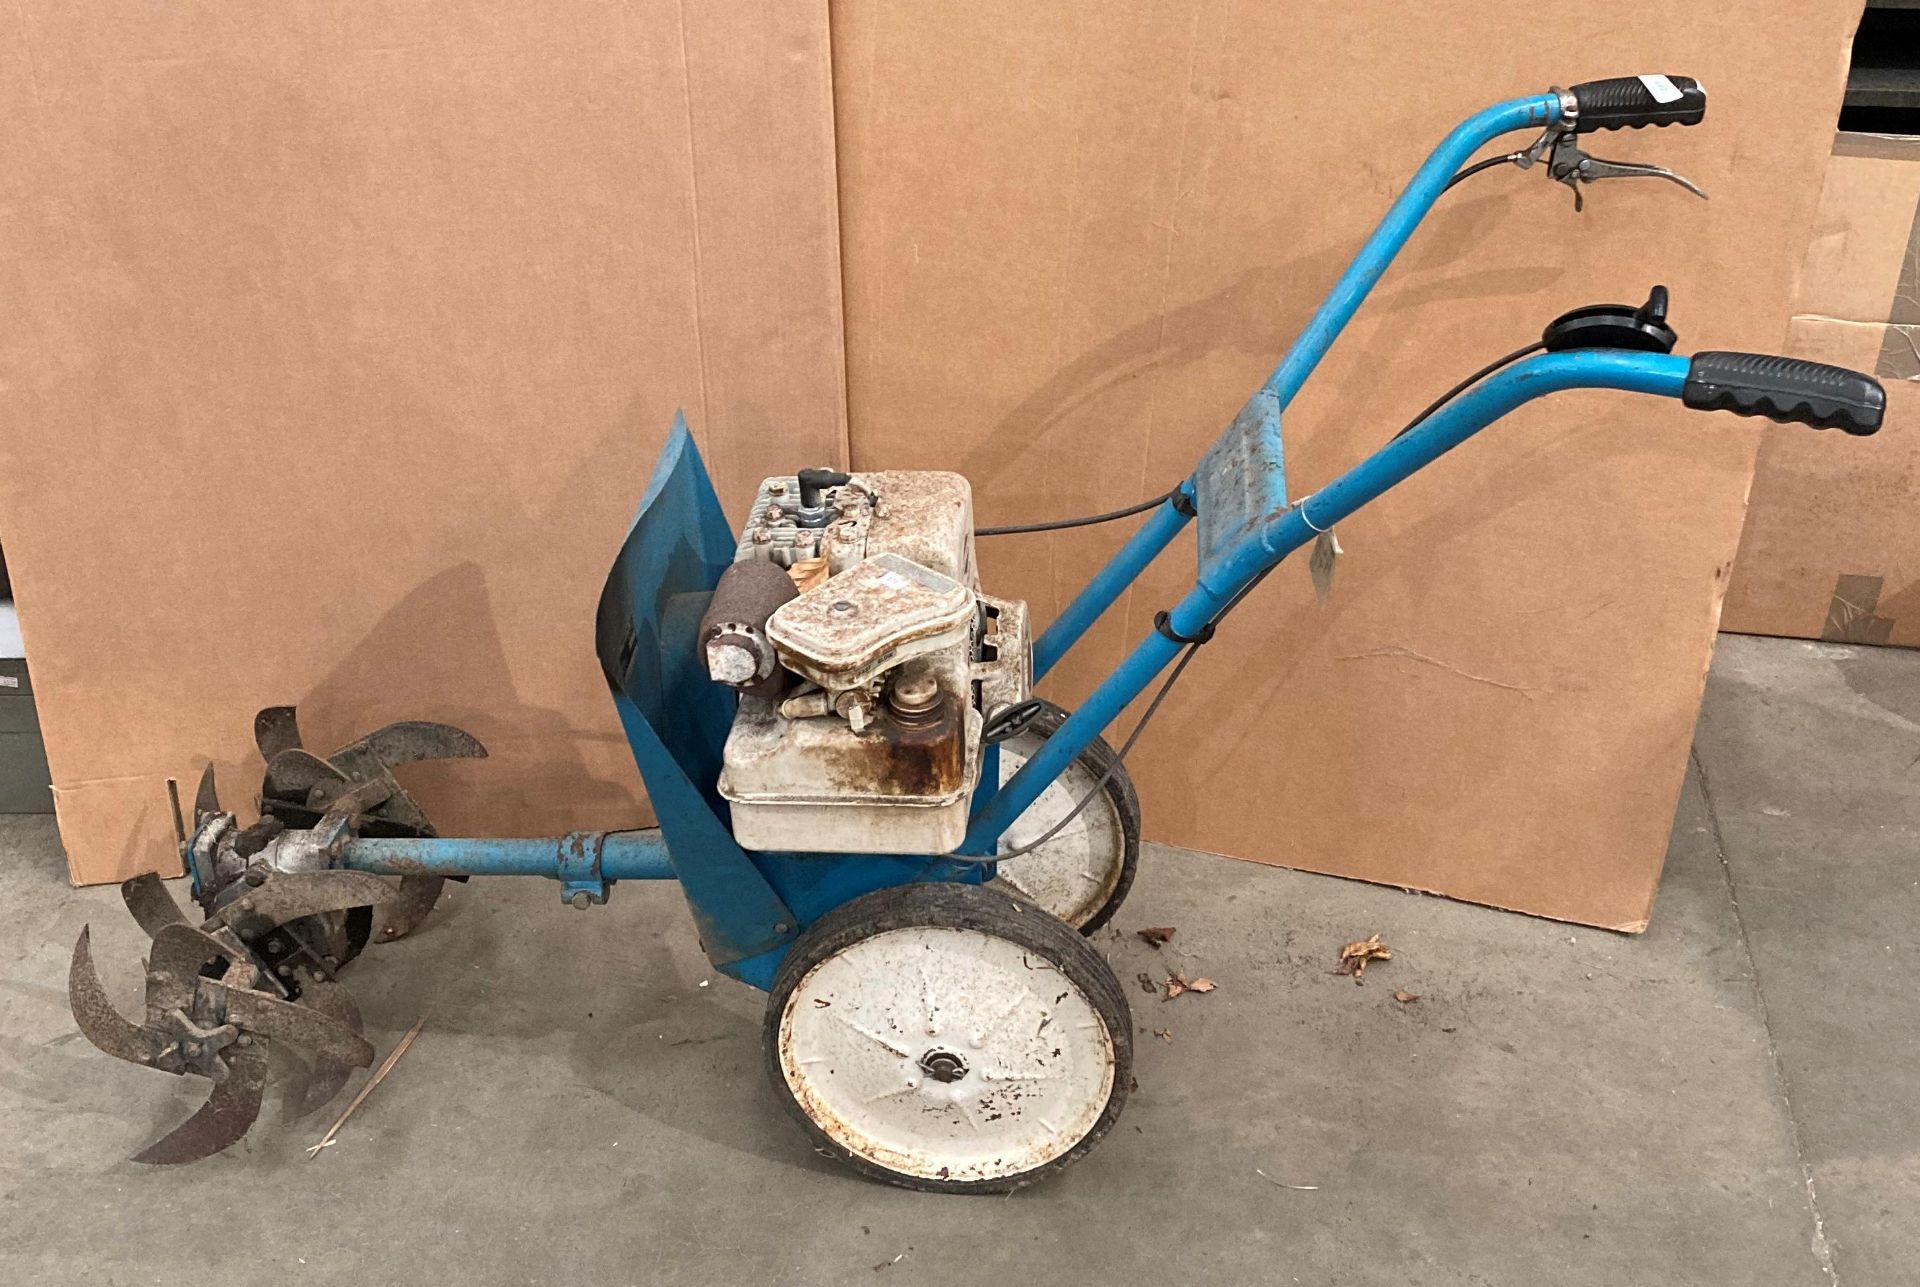 Landmaster super 88 petrol rotovator with a Briggs and Stratton 3hp 4 cycle engine (middle of